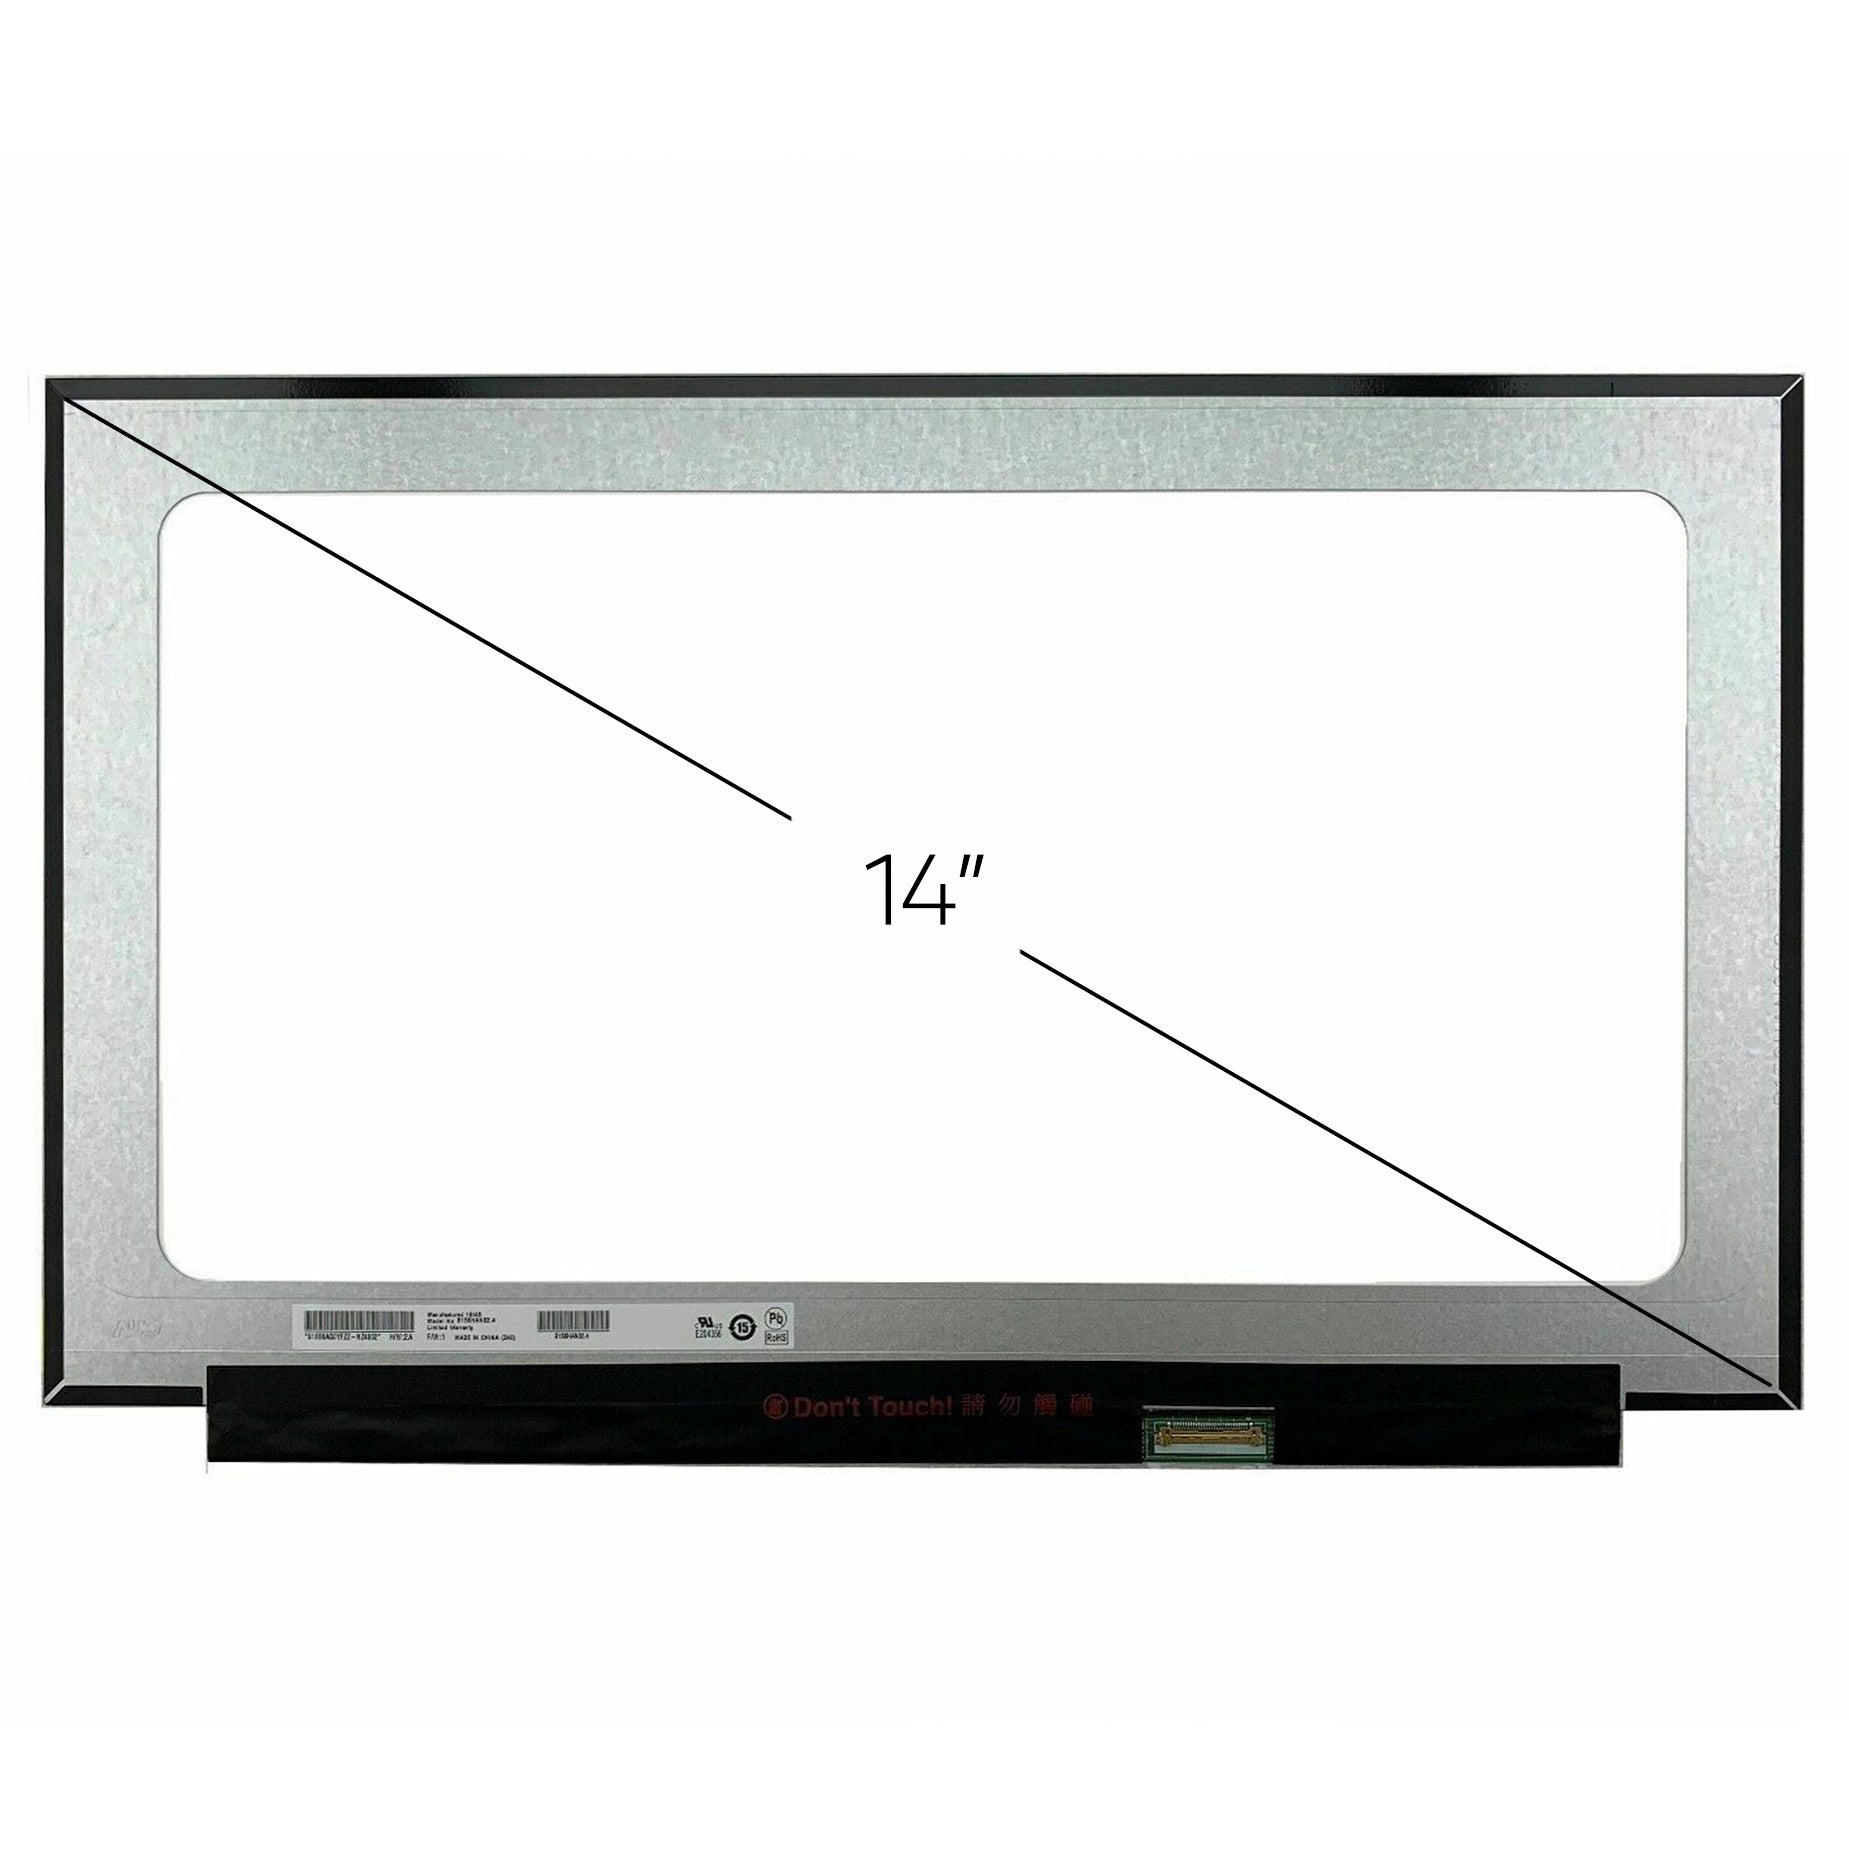 Screen Replacement for NV140FHM-N49 FHD 1920x1080 IPS Matte LCD